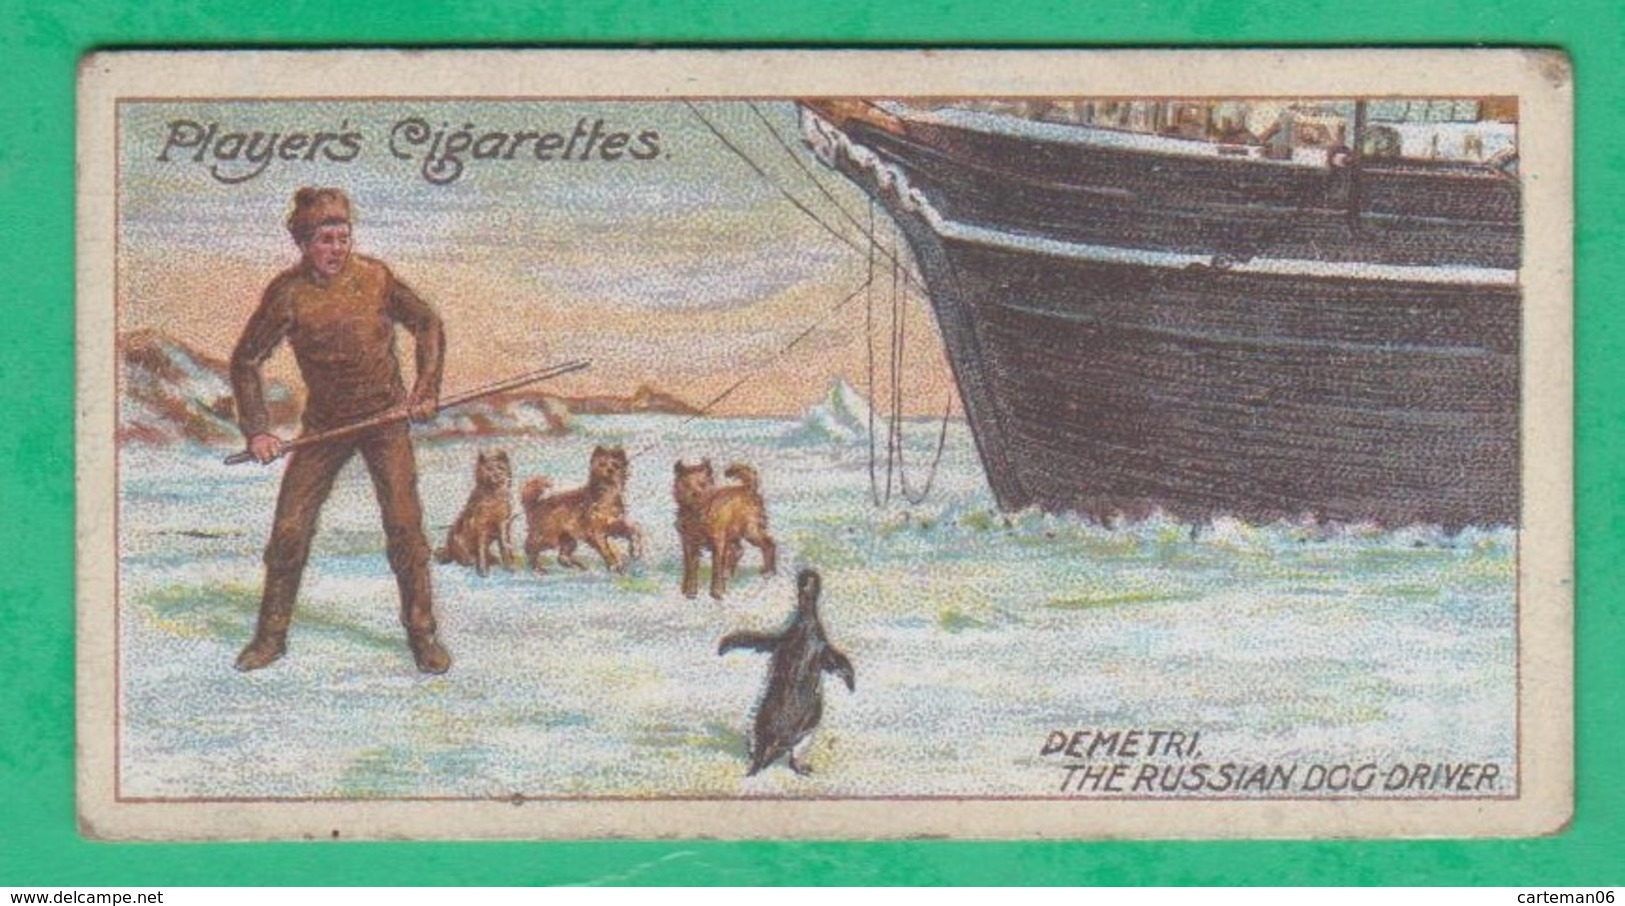 John Player, Player's Cigarettes, Polar Exploration - Demetri, The Russian Dogdriver, Keeping A Penguin From The Dogs - Player's